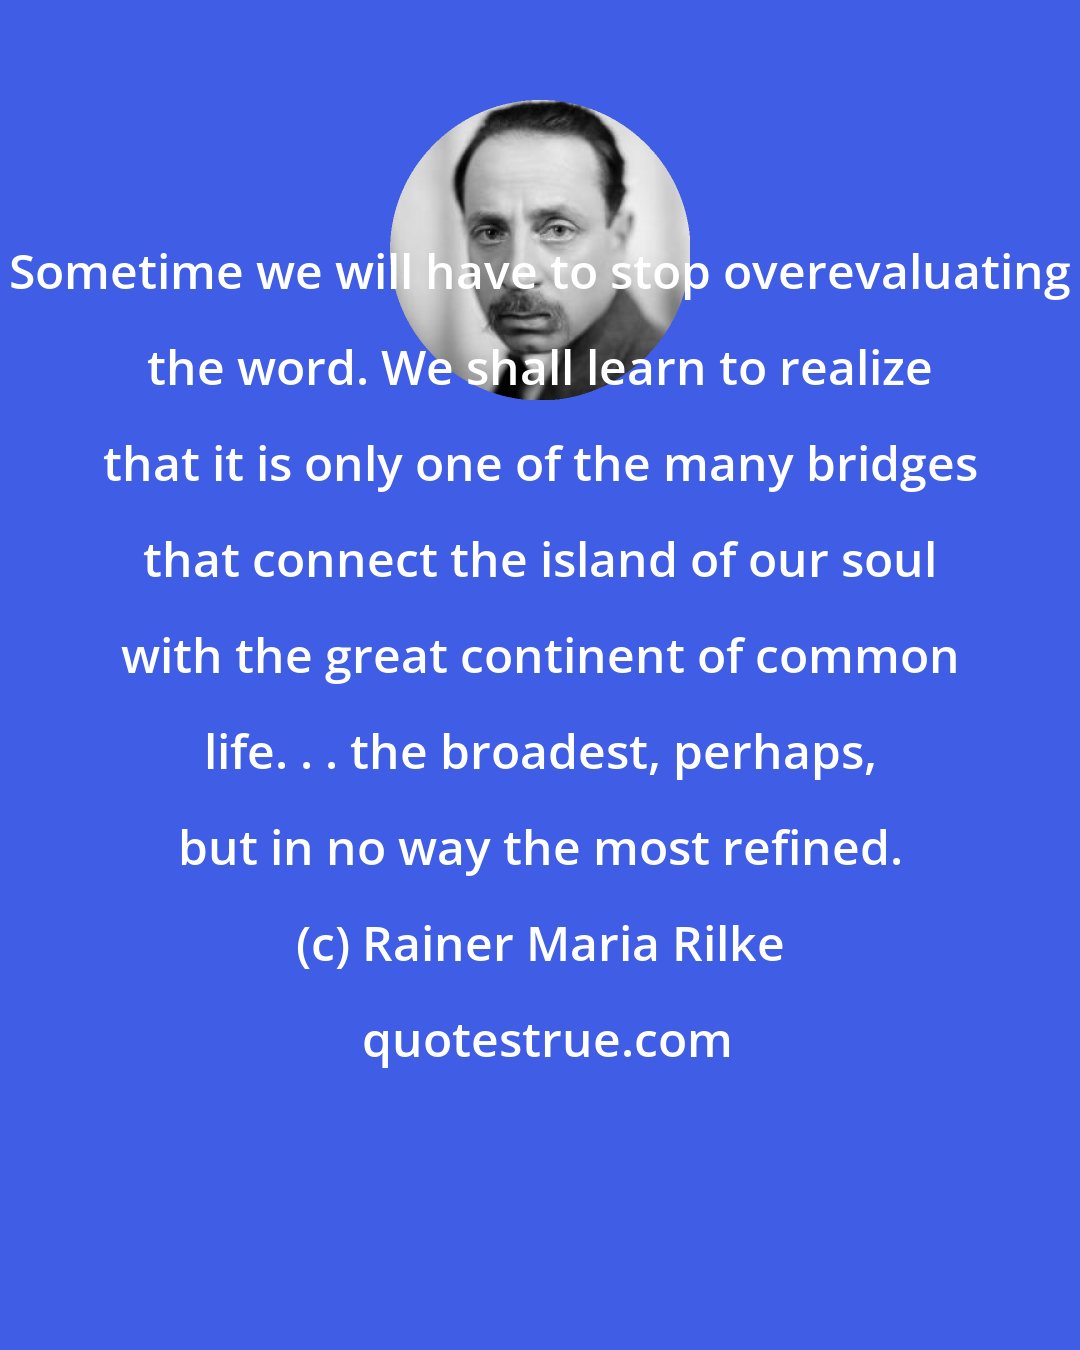 Rainer Maria Rilke: Sometime we will have to stop overevaluating the word. We shall learn to realize that it is only one of the many bridges that connect the island of our soul with the great continent of common life. . . the broadest, perhaps, but in no way the most refined.